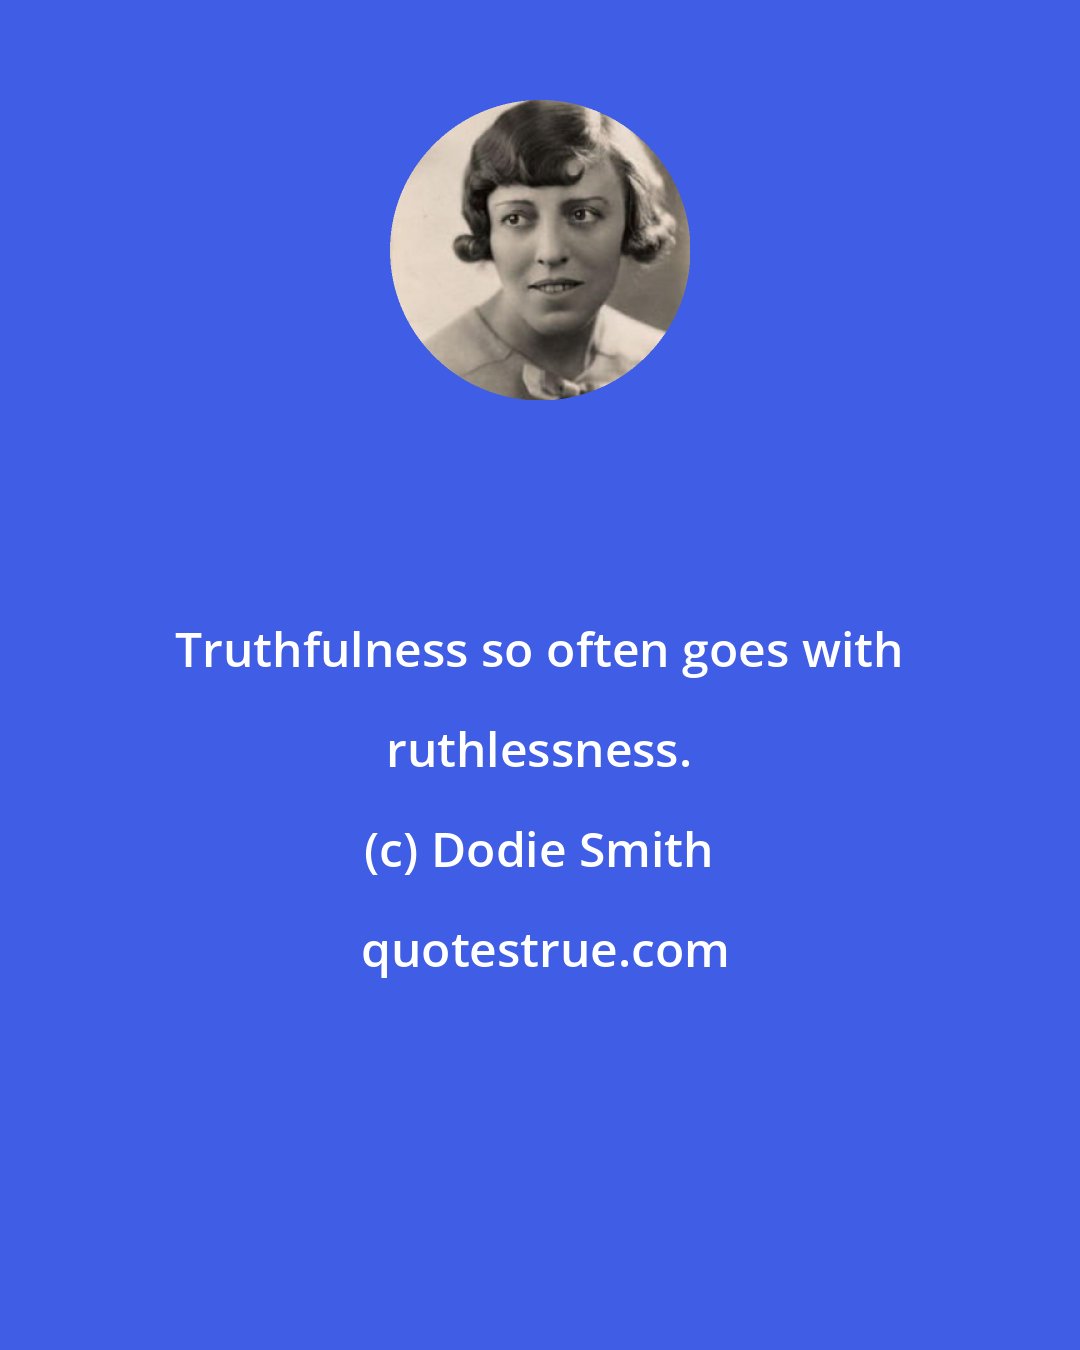 Dodie Smith: Truthfulness so often goes with ruthlessness.